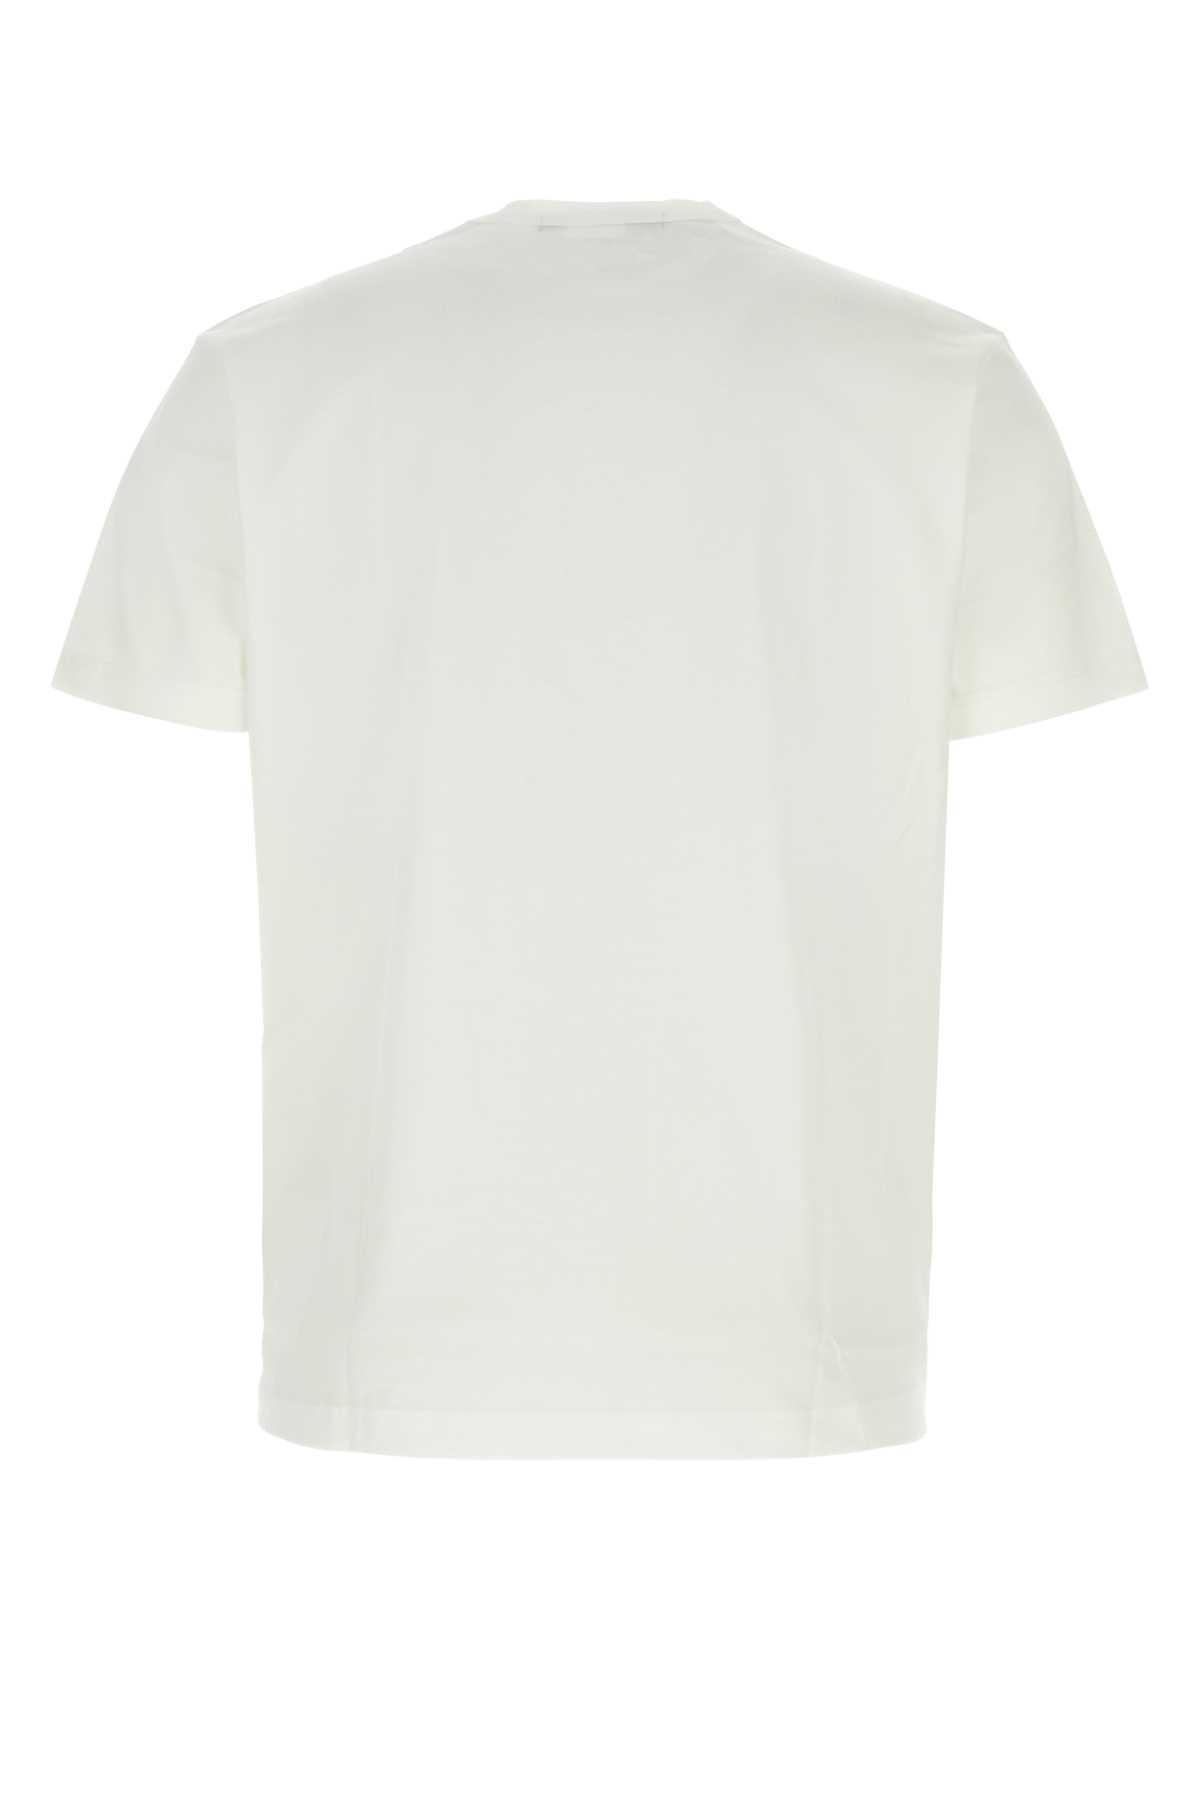 Junya Watanabe White Cotton T-shirt In Whitewhtre